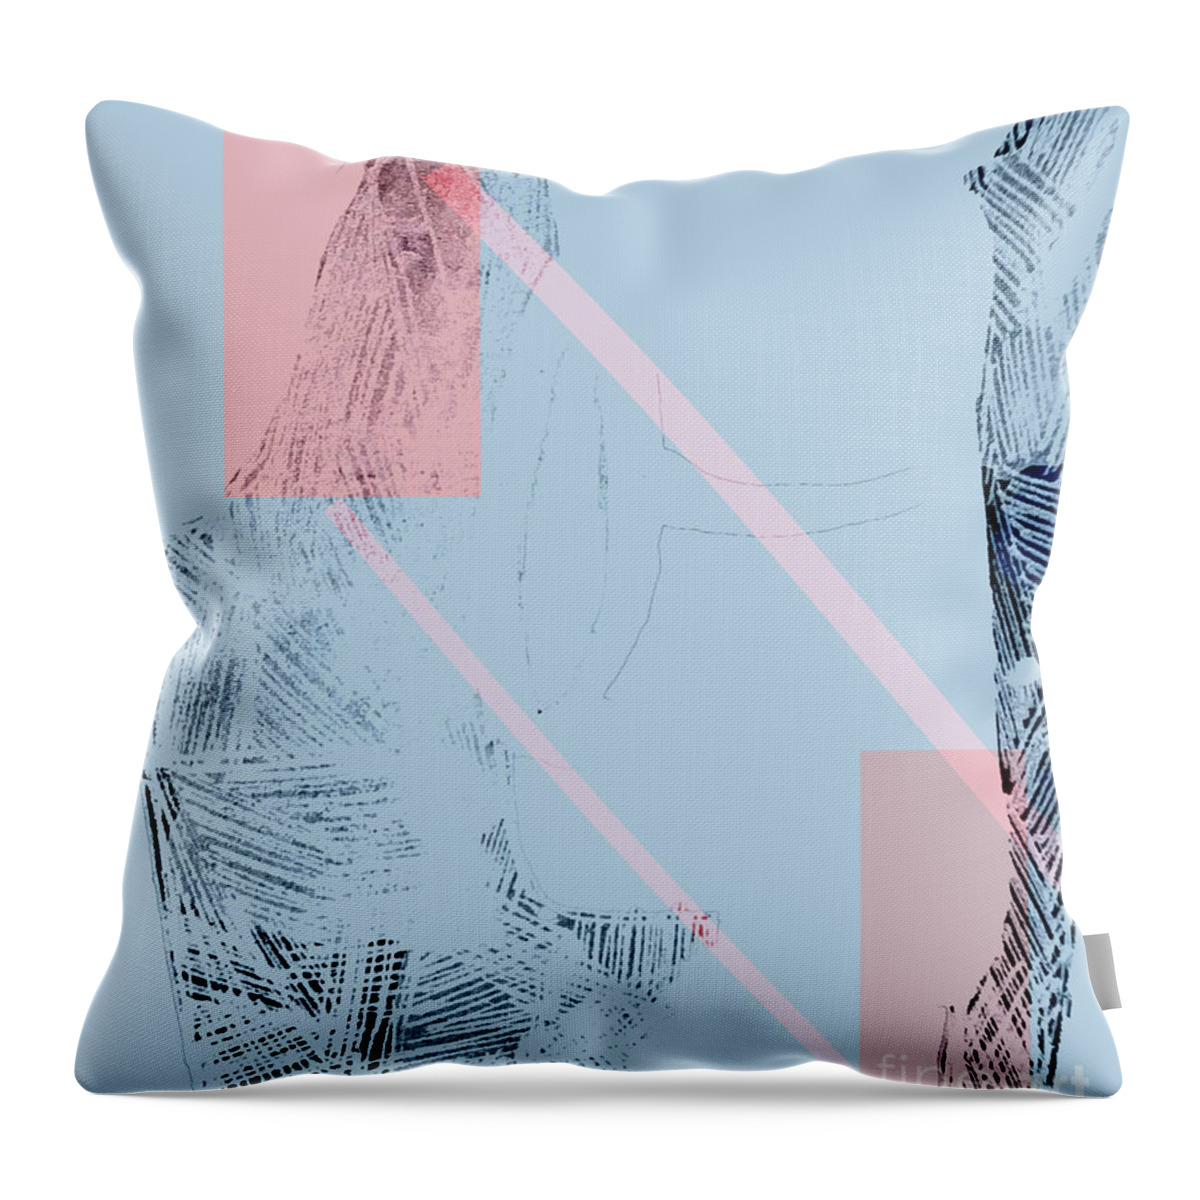 Contemporary Art Throw Pillow featuring the digital art In Their Journey by Jeremiah Ray